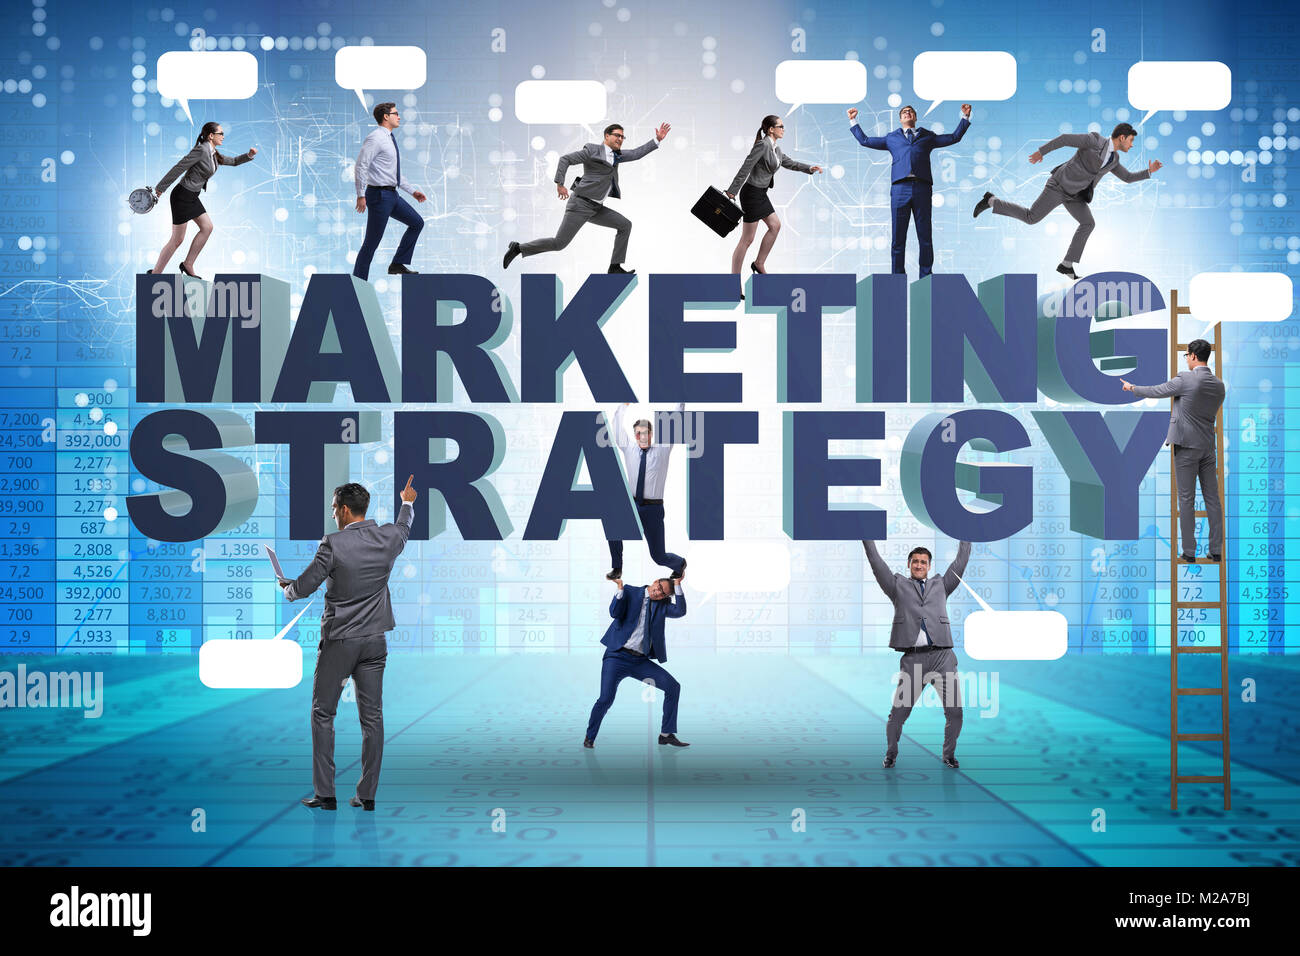 Marketing strategy concept with businessman and team Stock Photo